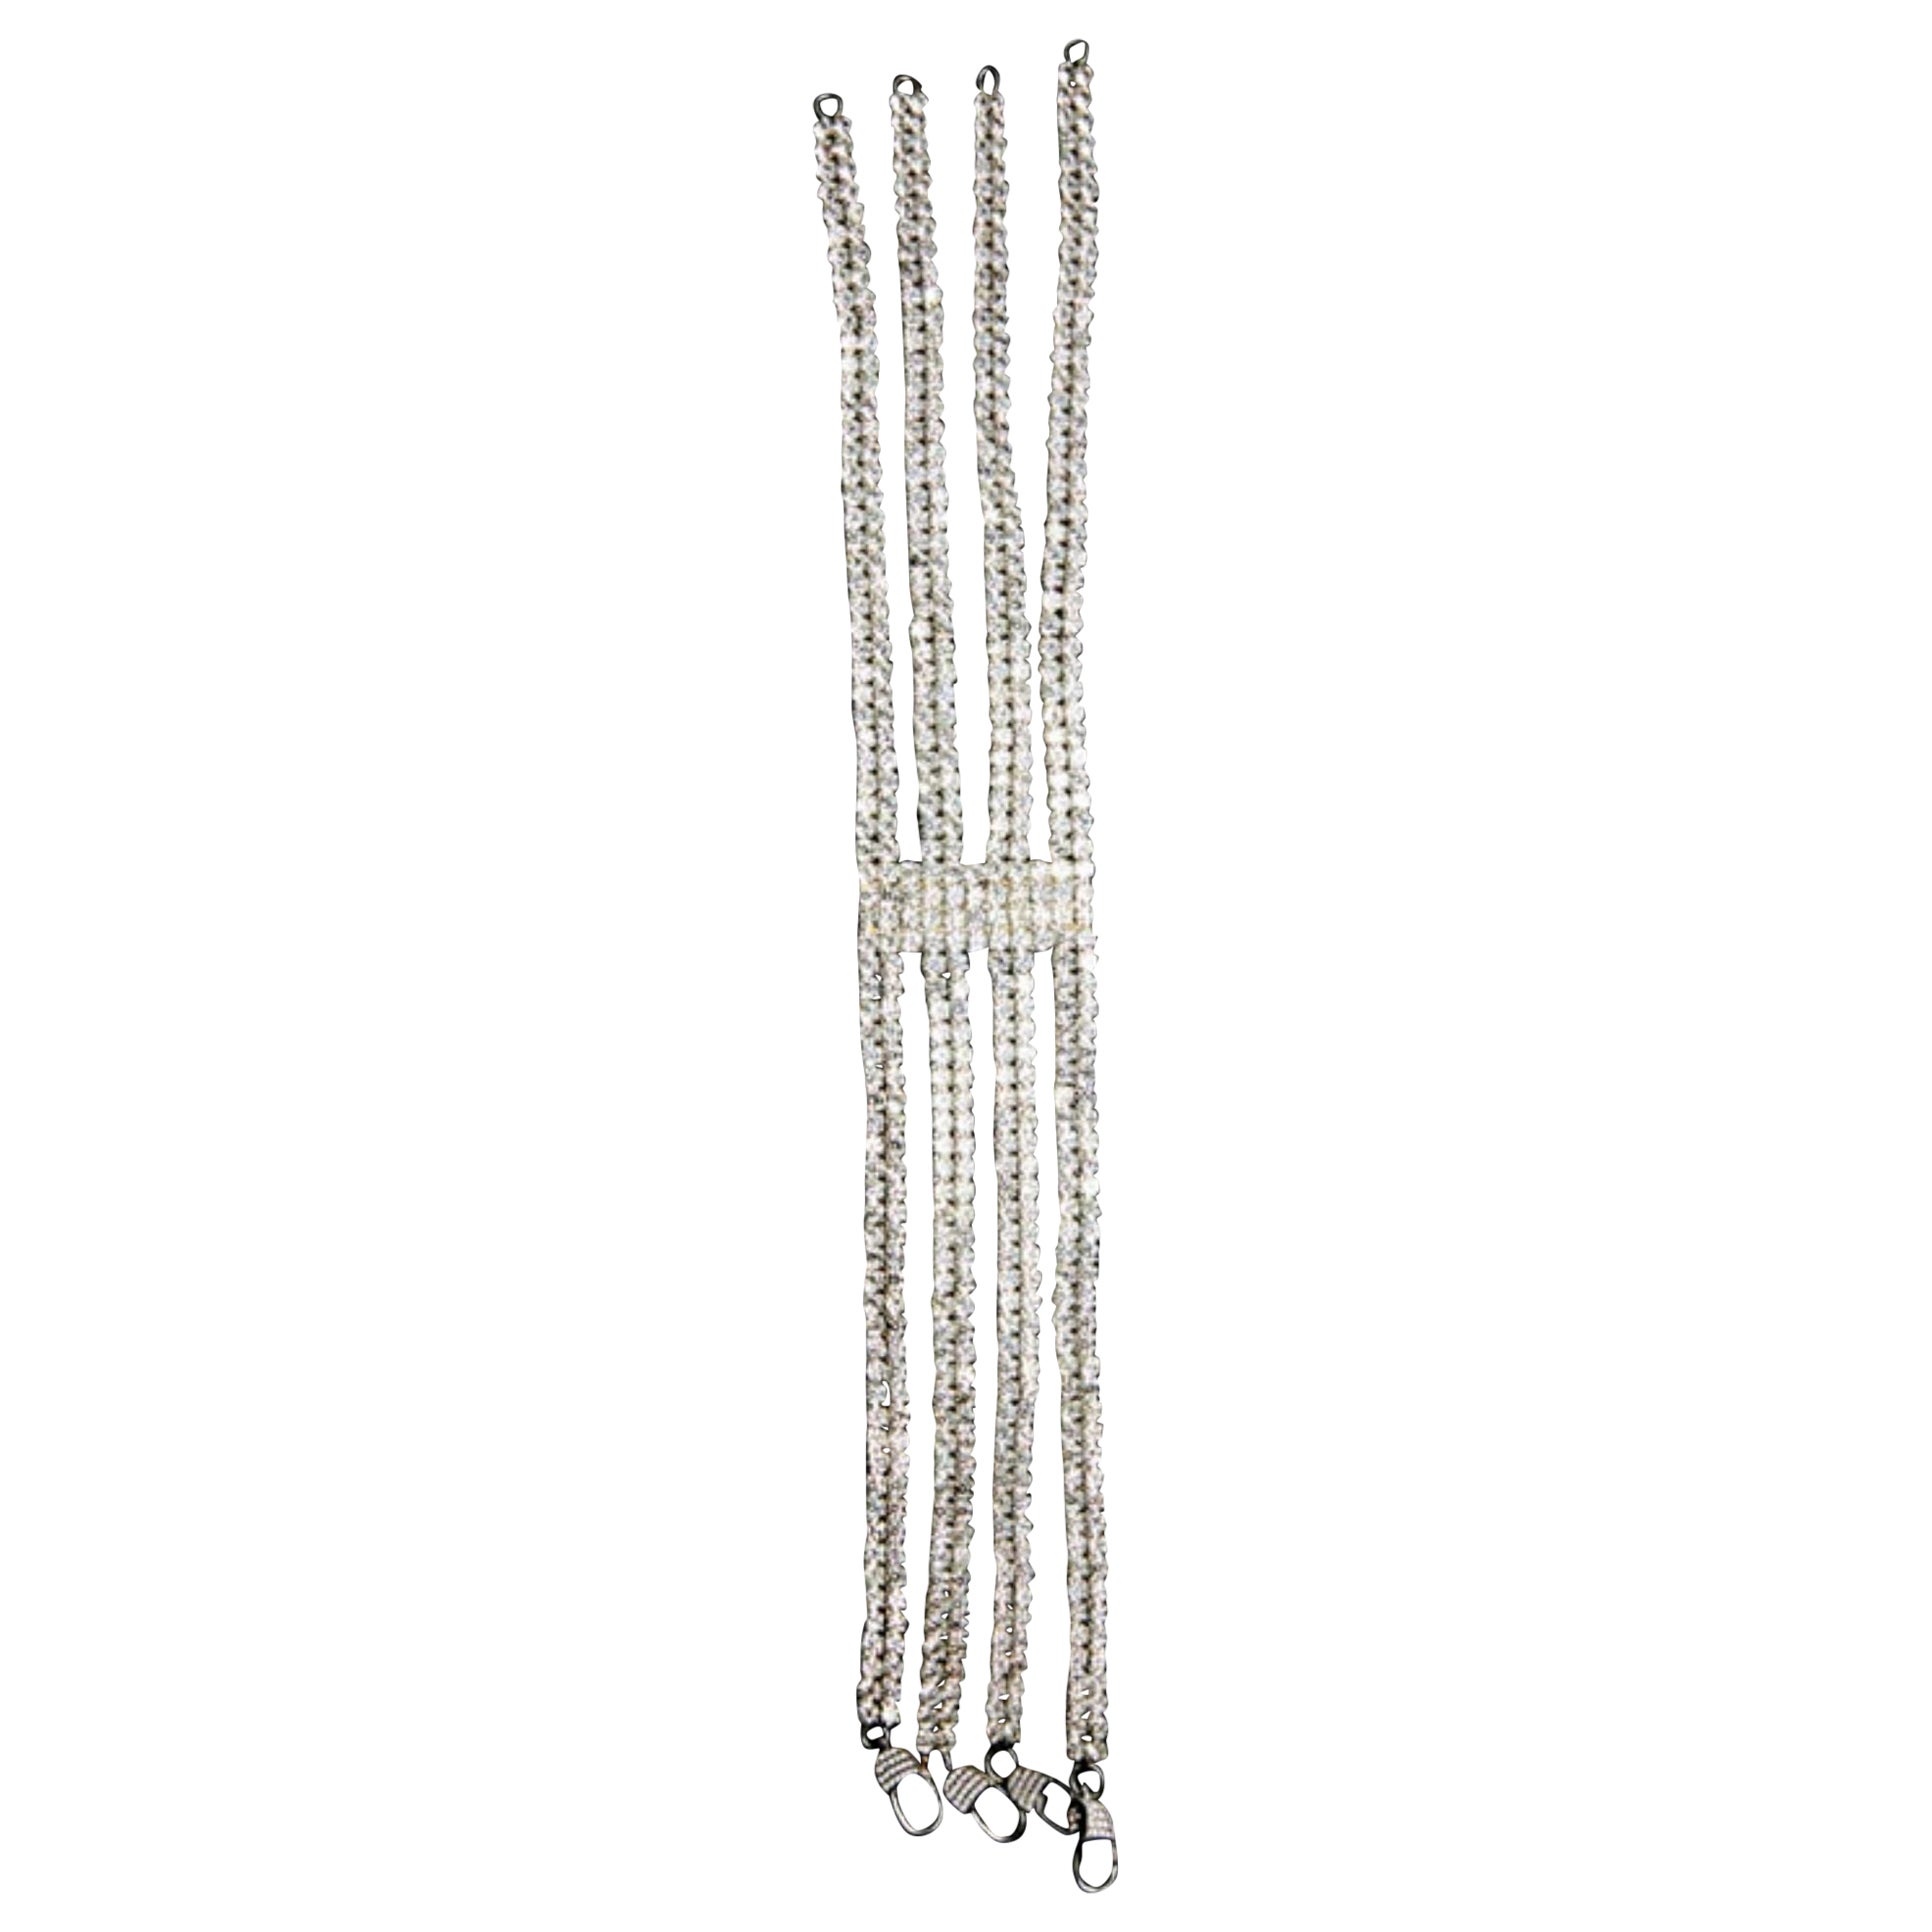 4 Row Art Deco SIlver Crystal Choker Necklace For Sale